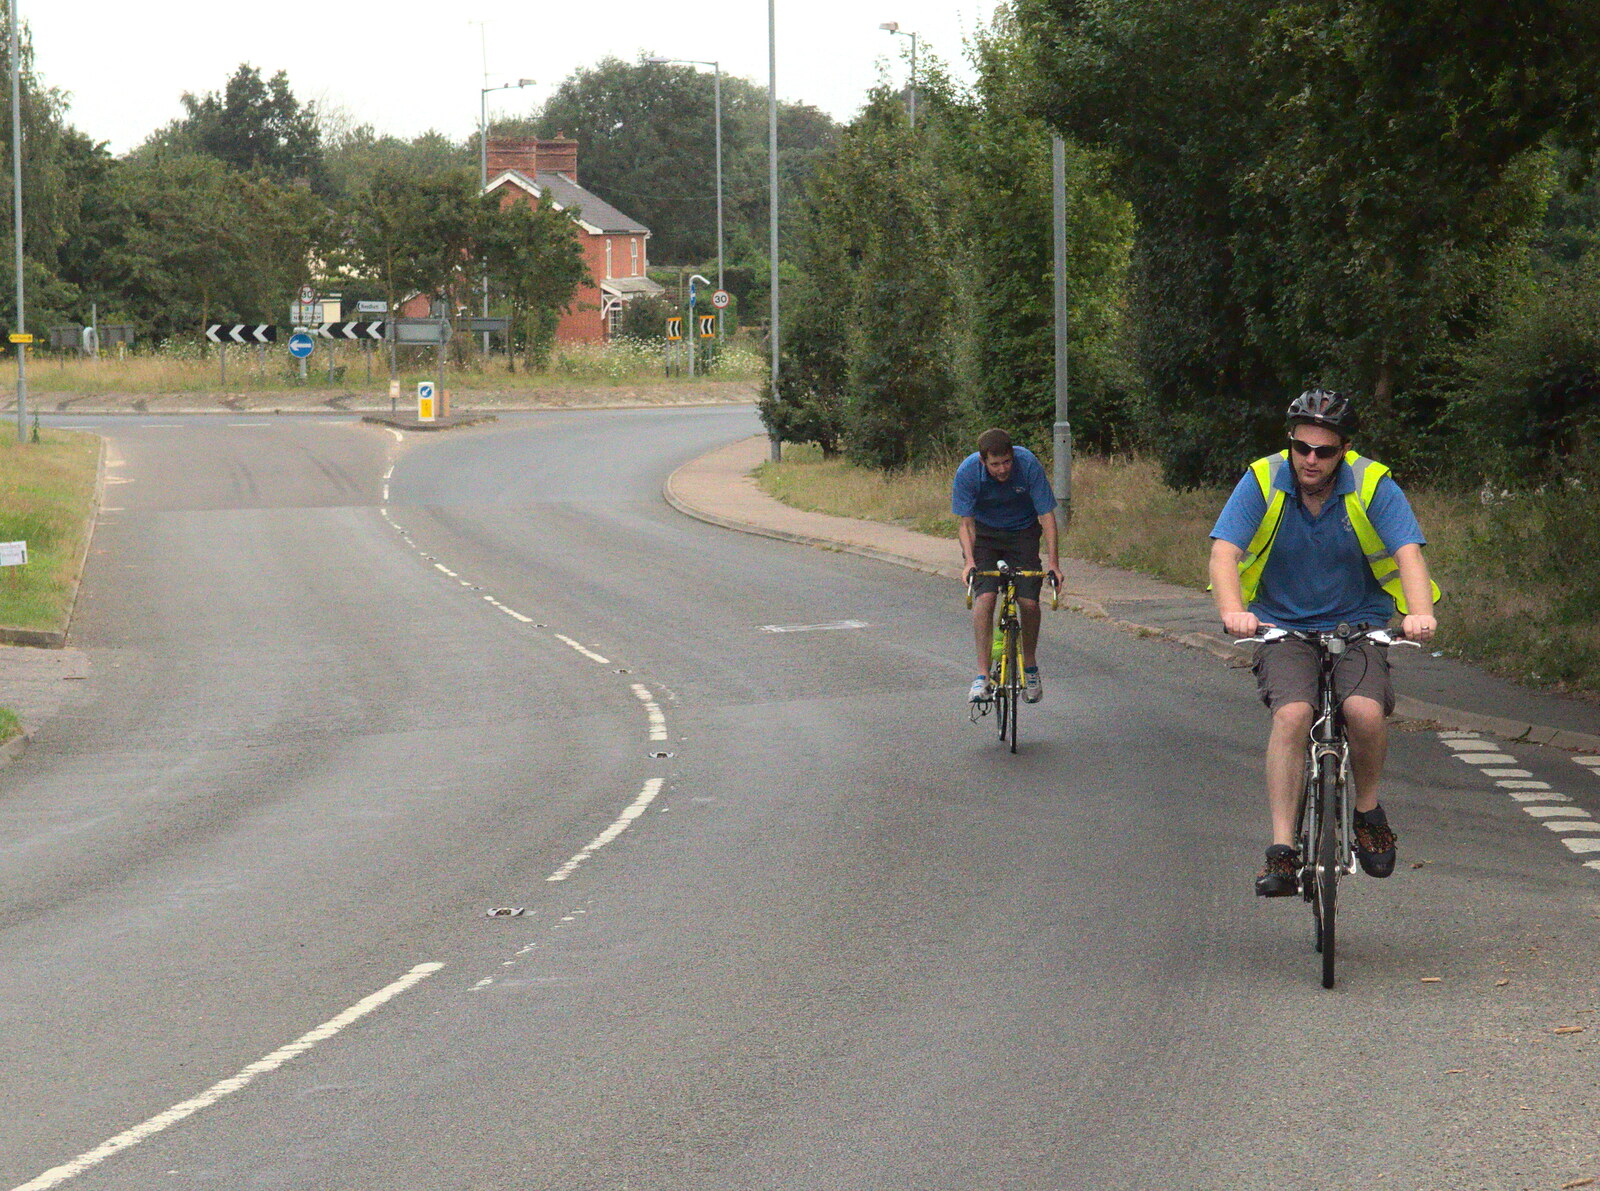 Phil and Paul head up towards Harleston from The BSCC at Harleston, and a Visit From Cambridge, Brome, Suffolk - 31st July 2014